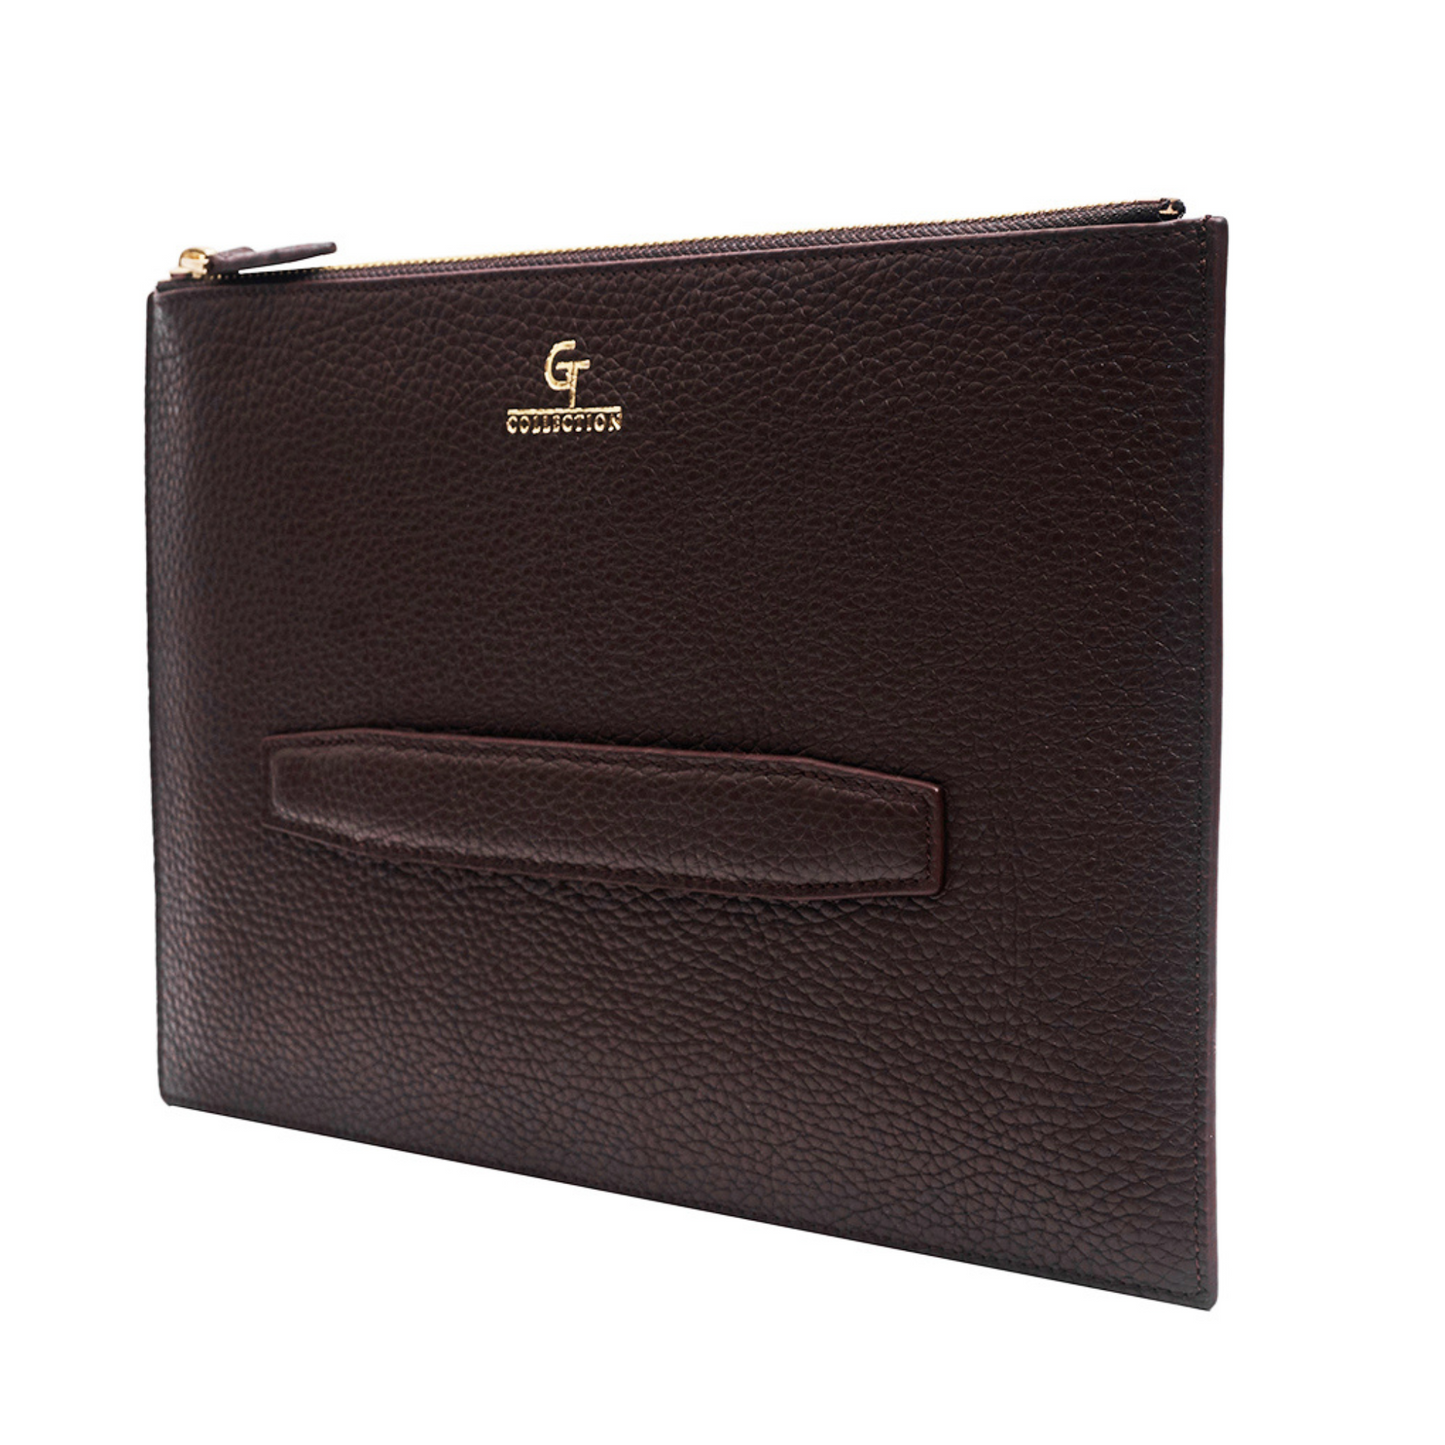 Men's Leather Clutch Bag - Brown with golden details